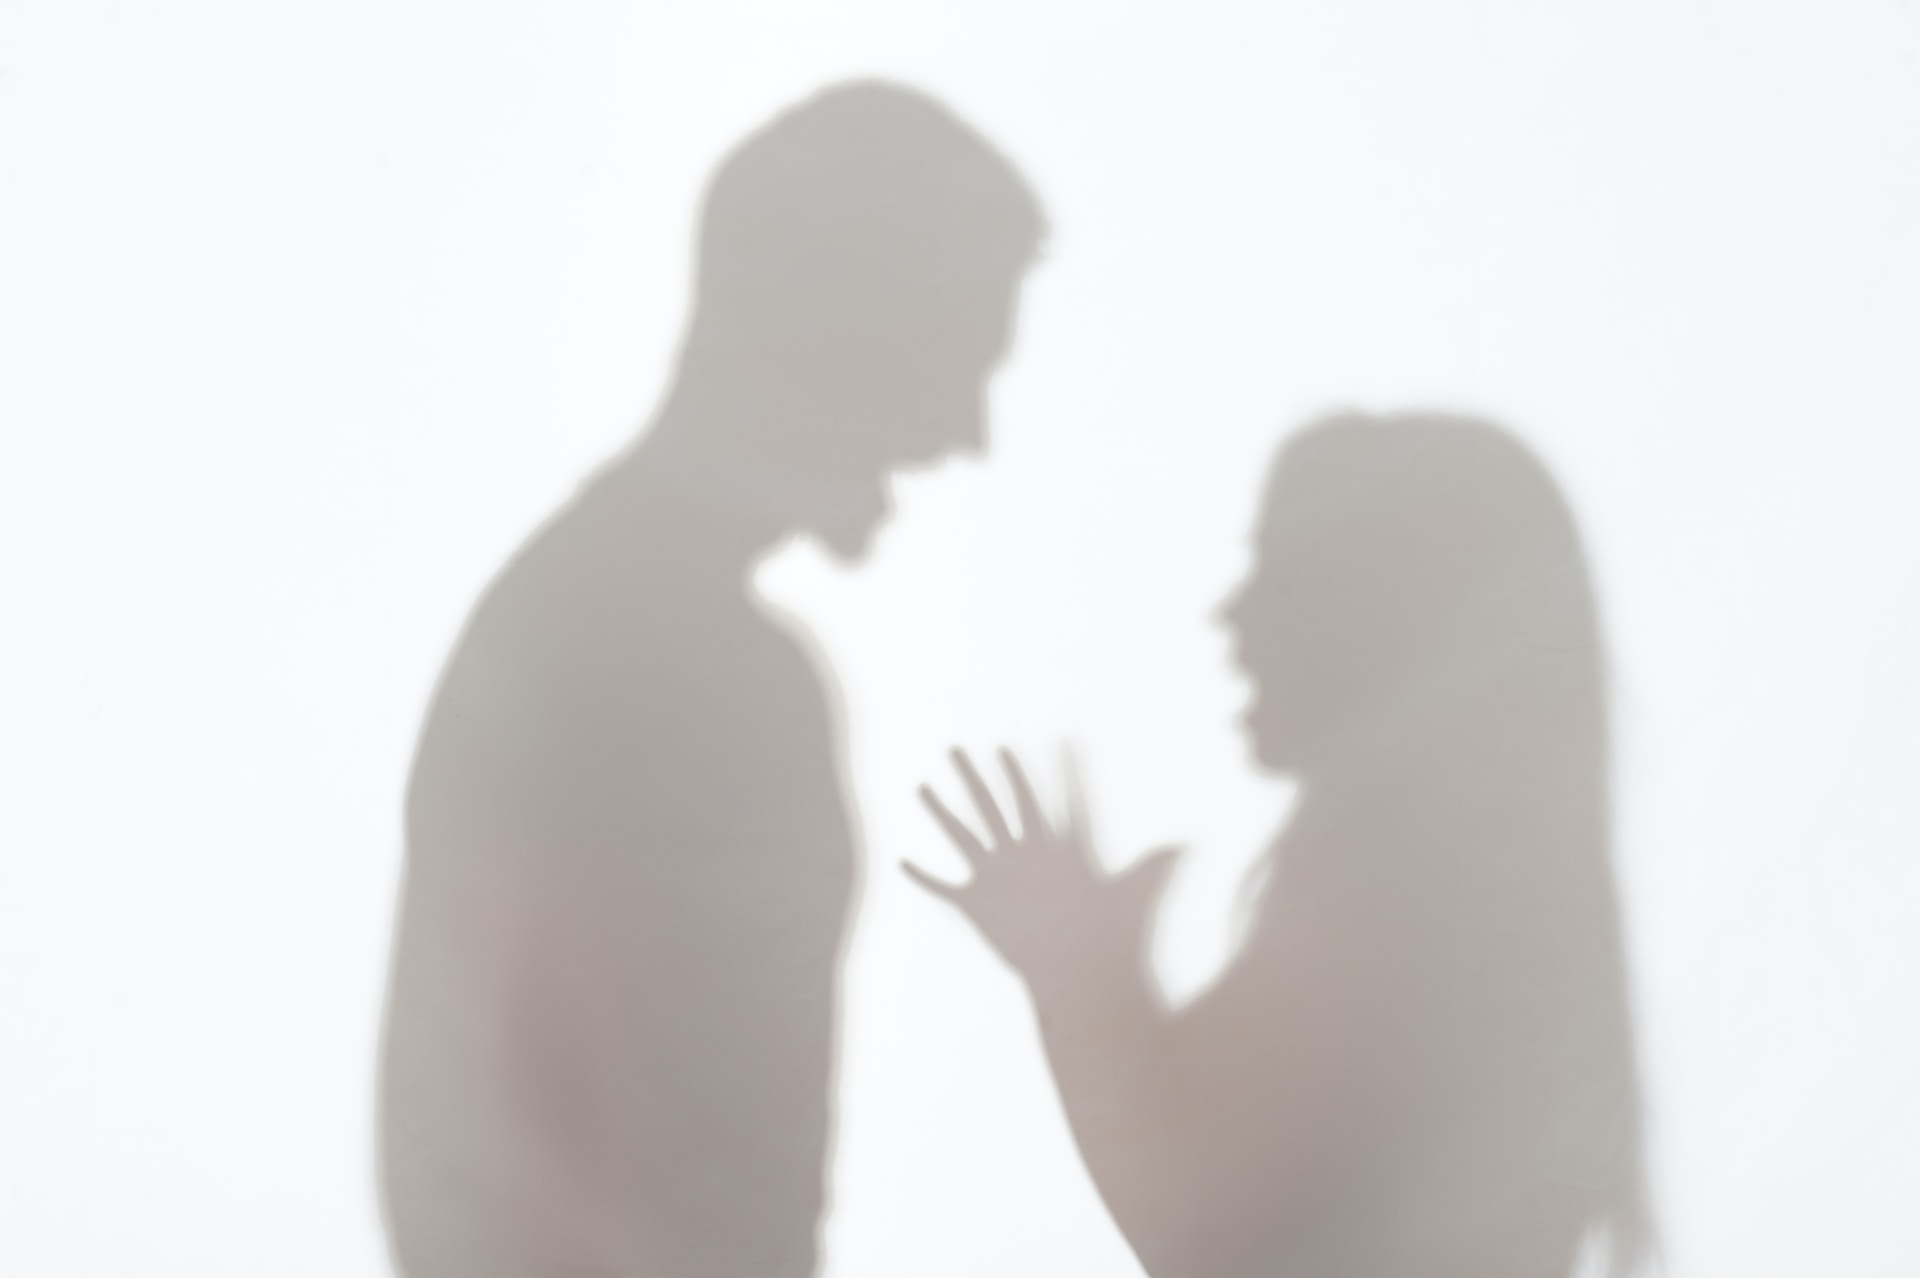 How to Find a Lawyer to Handle Domestic Violence Charges